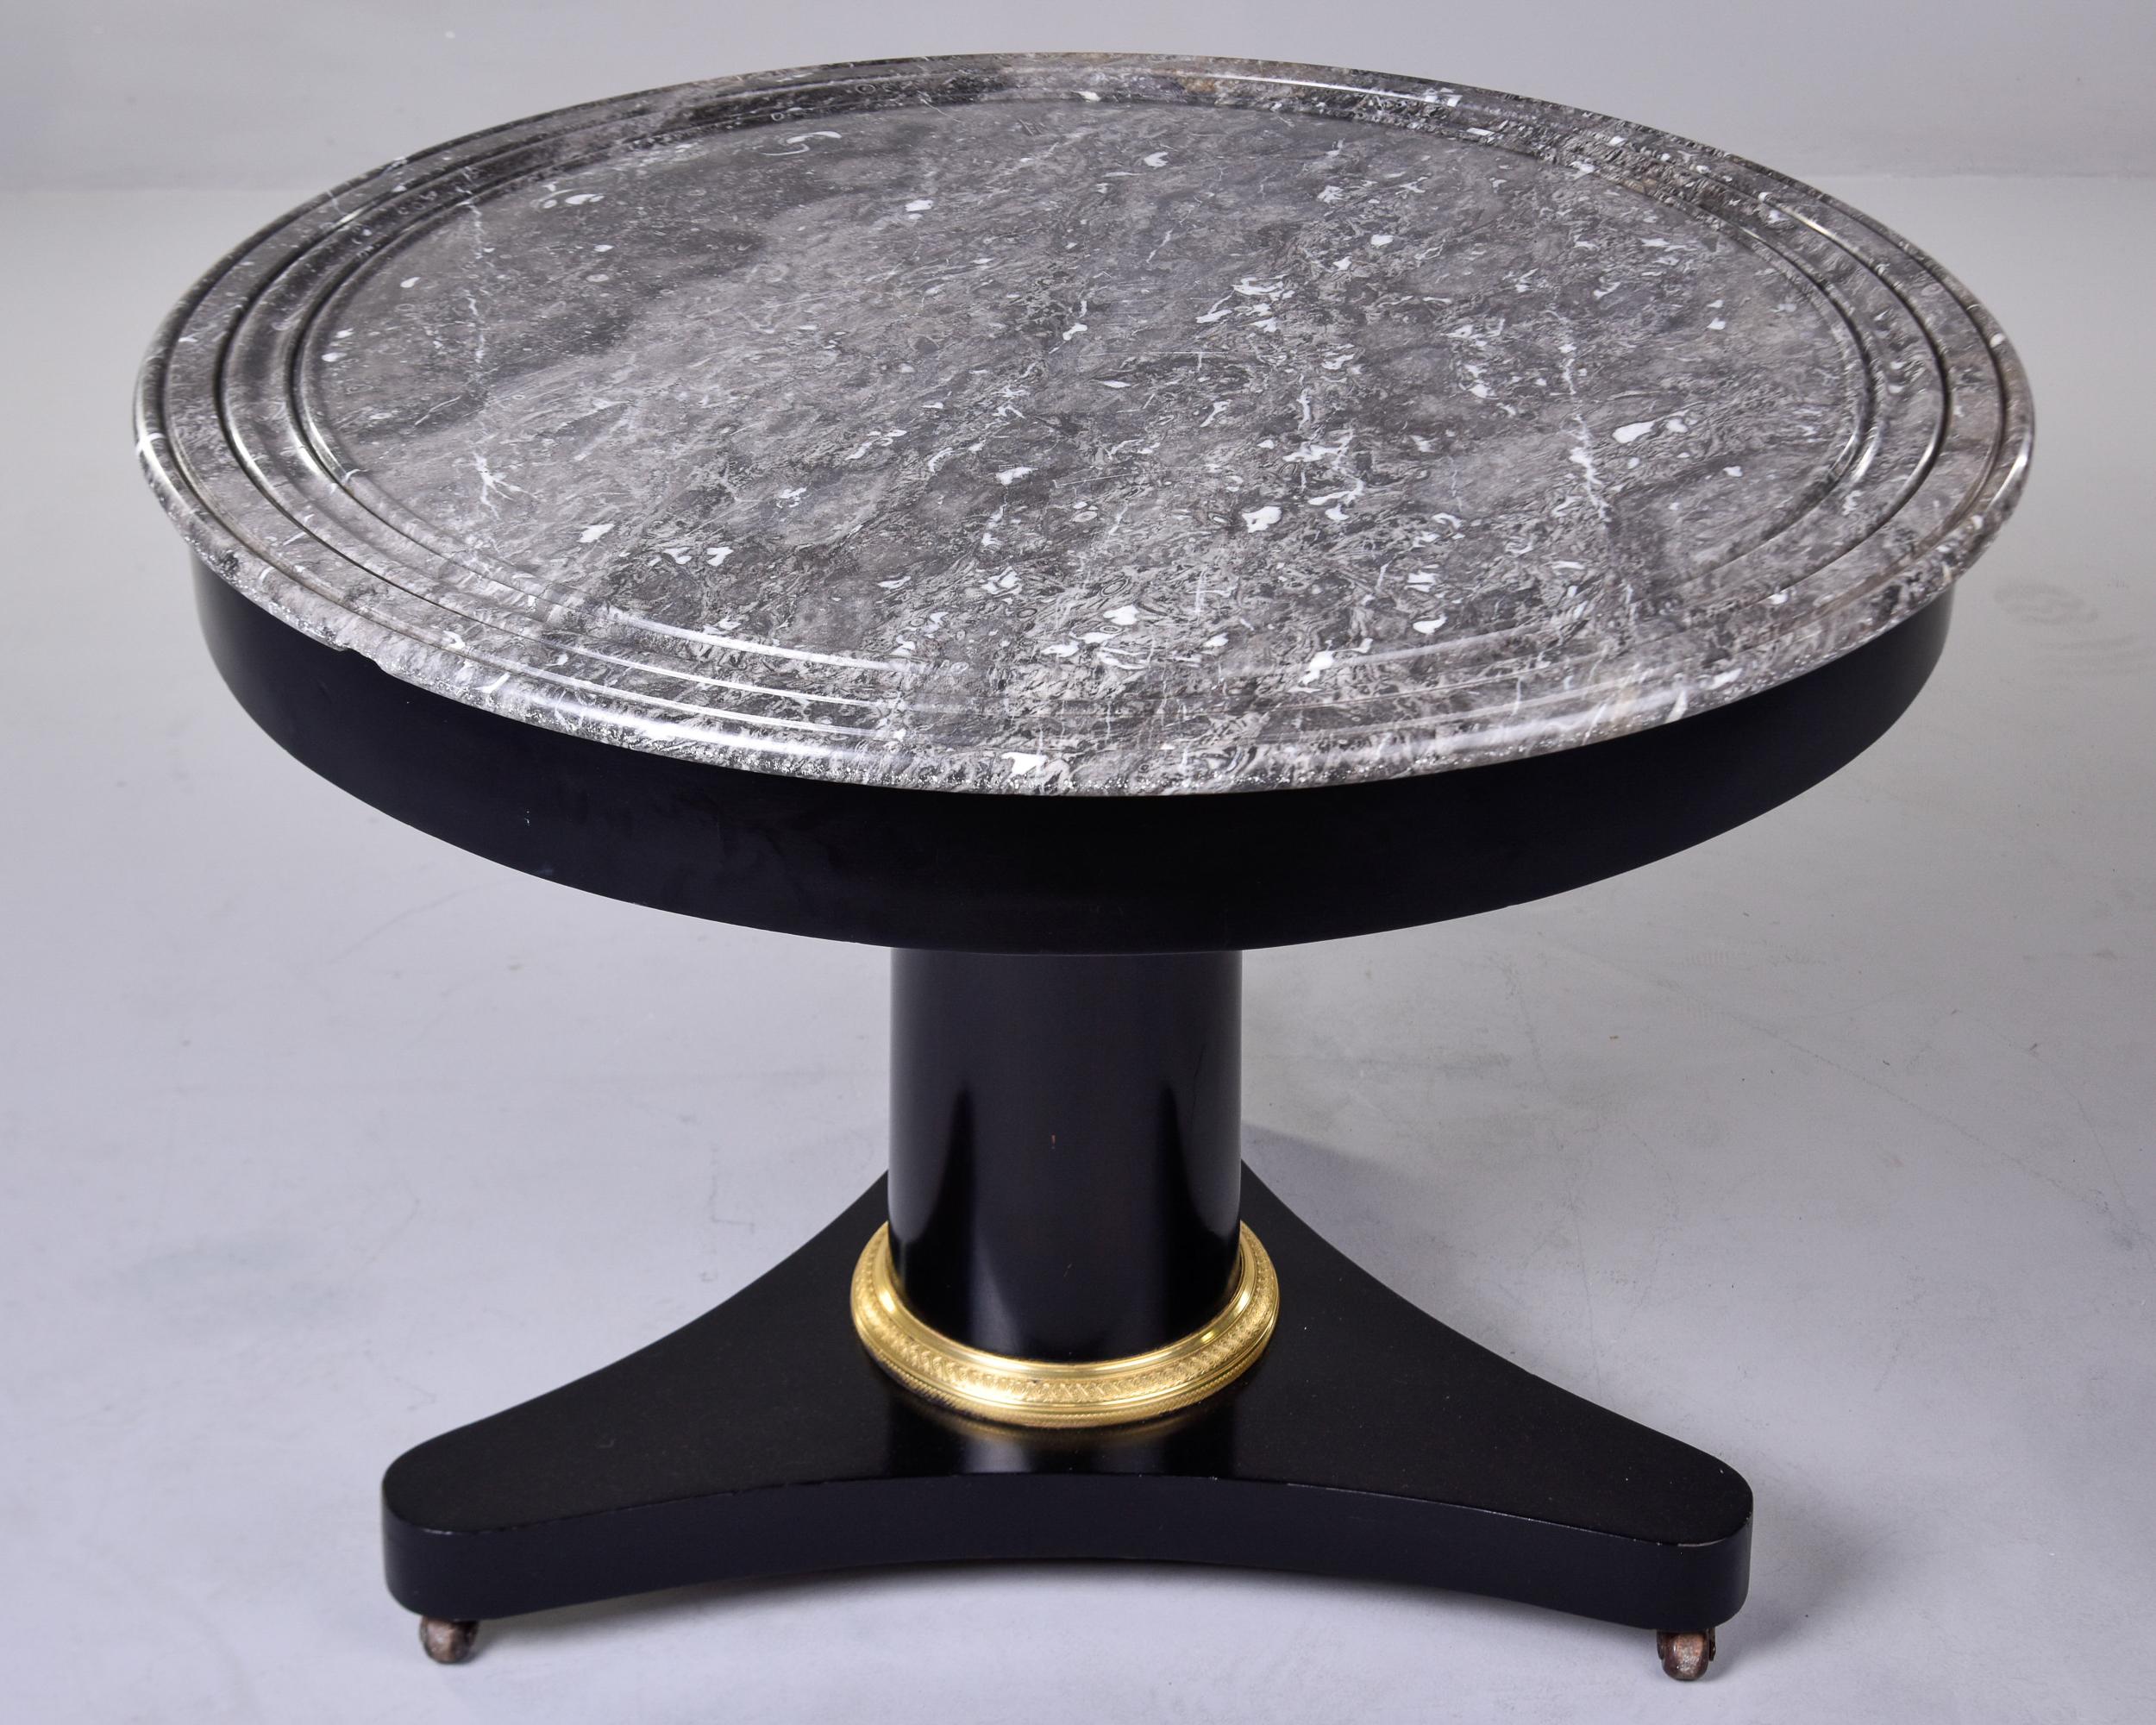 ebonized 19th Century Mahogany Round Center Empire Table with Marble Top For Sale 1